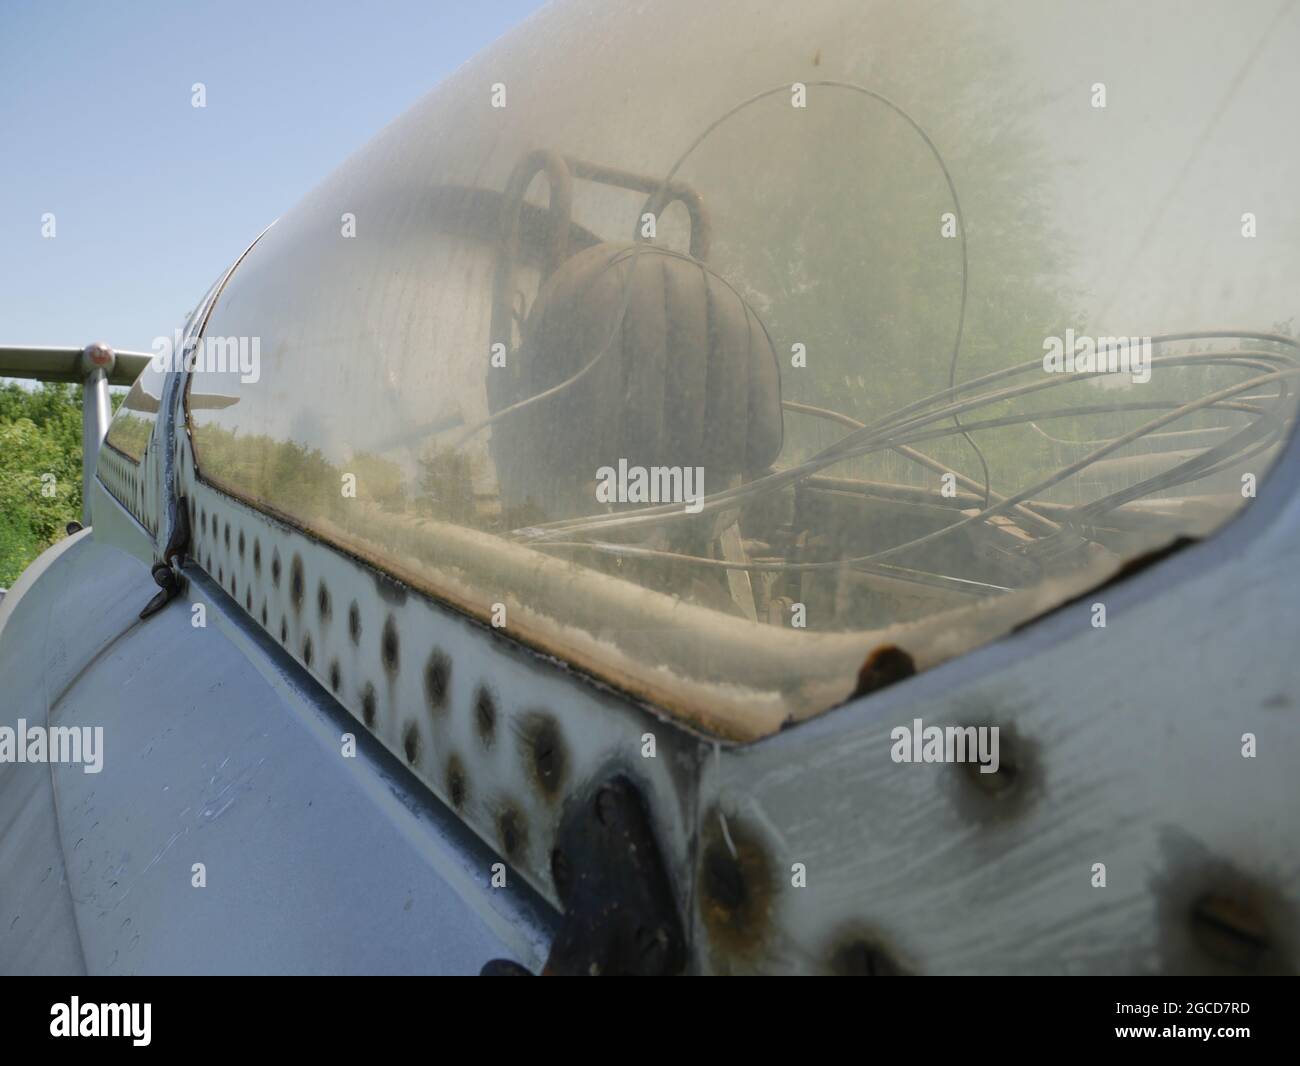 Military fighter plane old abandoned broken. Military abandoned equipment. Stock Photo